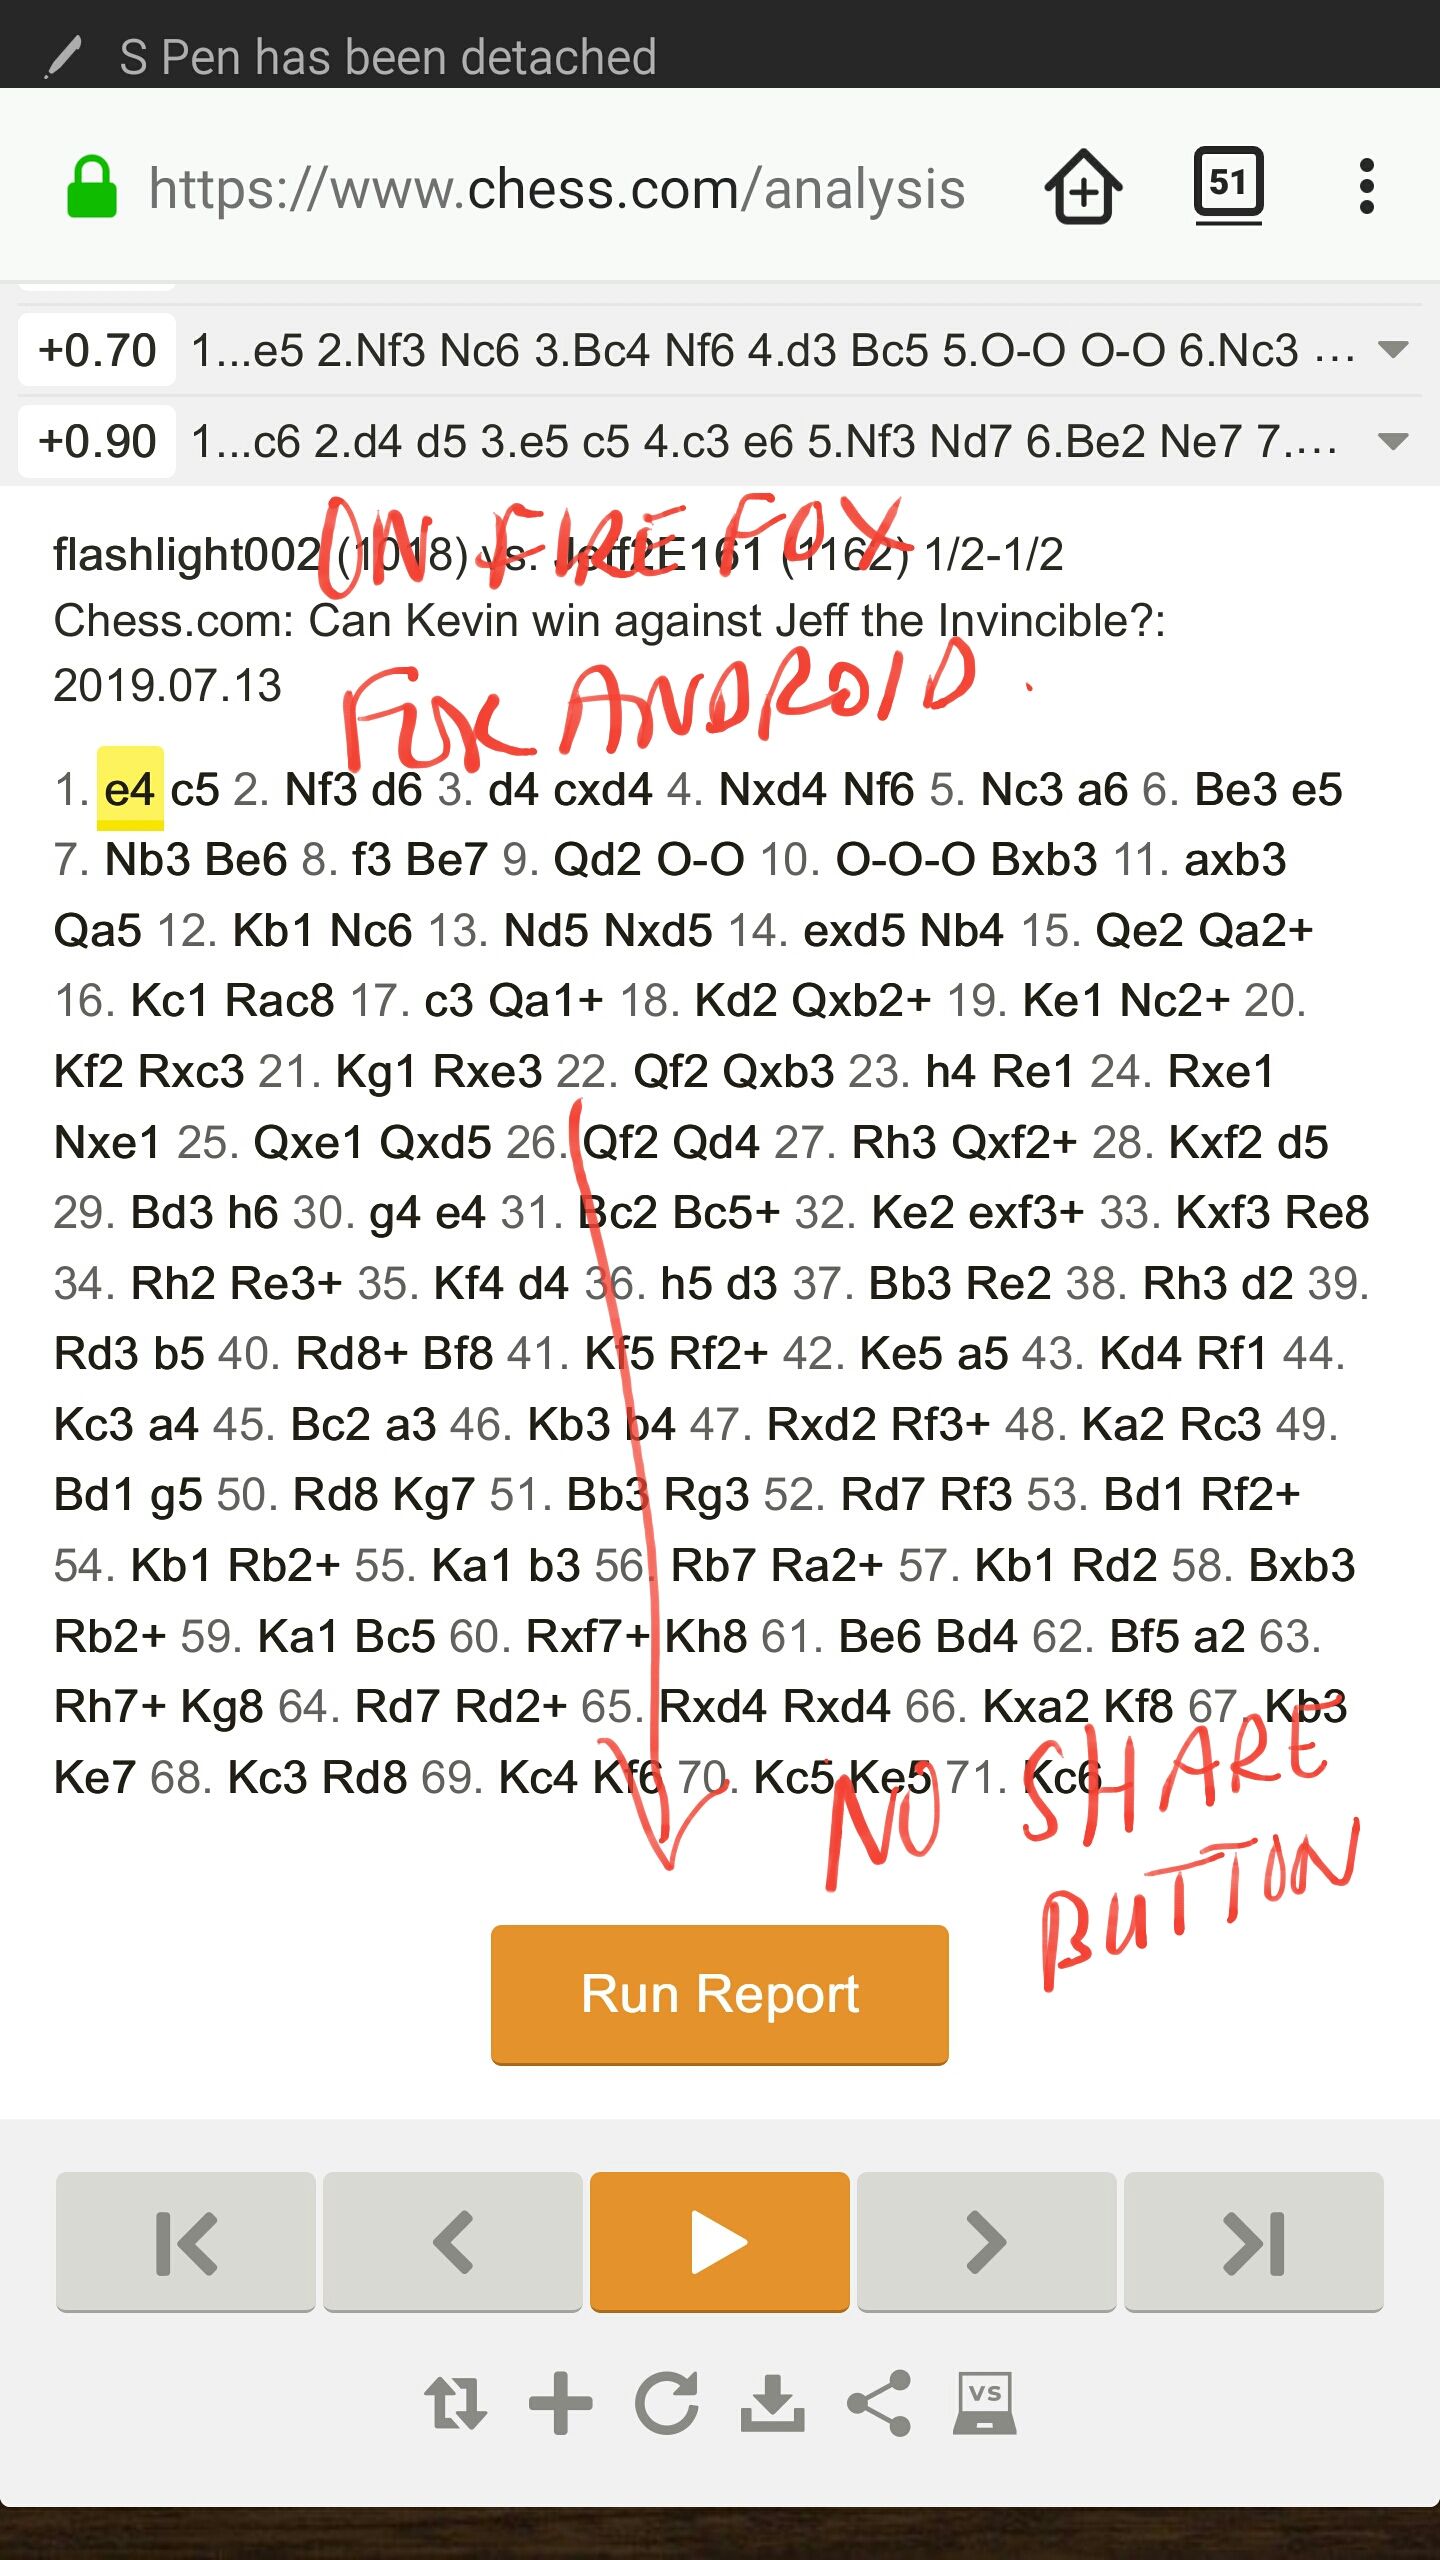 Browser add-ons make  very sad. - Chess Forums 